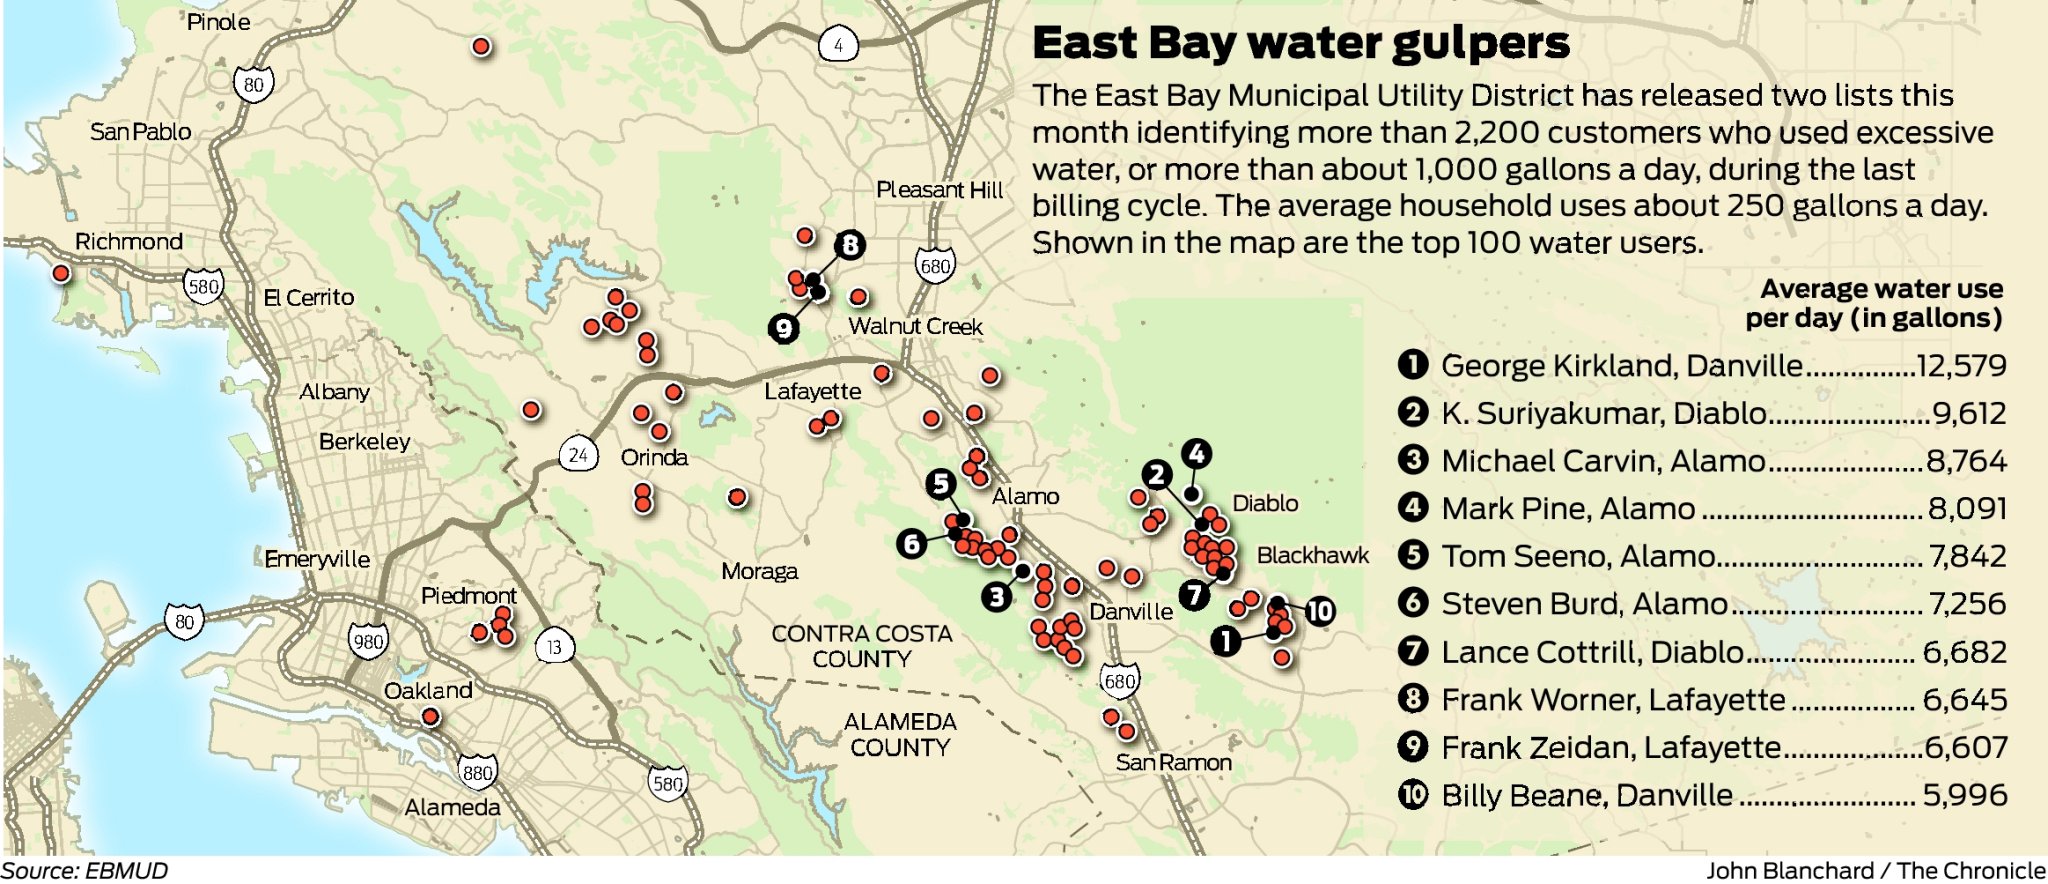 Billy Beane and oil exec among East Bay's biggest water guzzlers